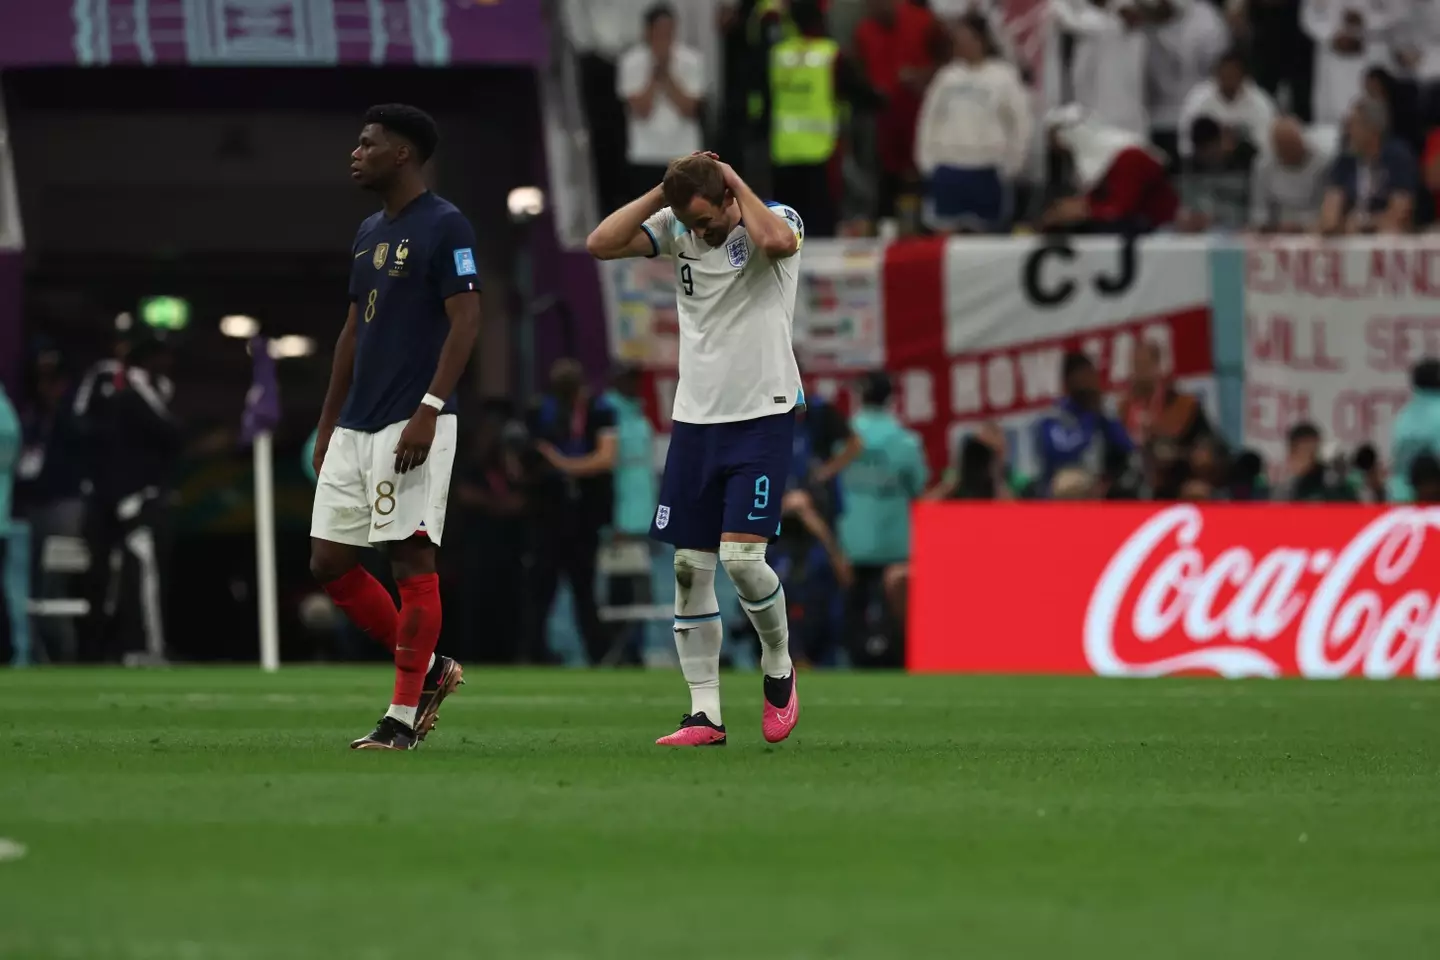 Harry Kane missed the second penalty in last night's game.